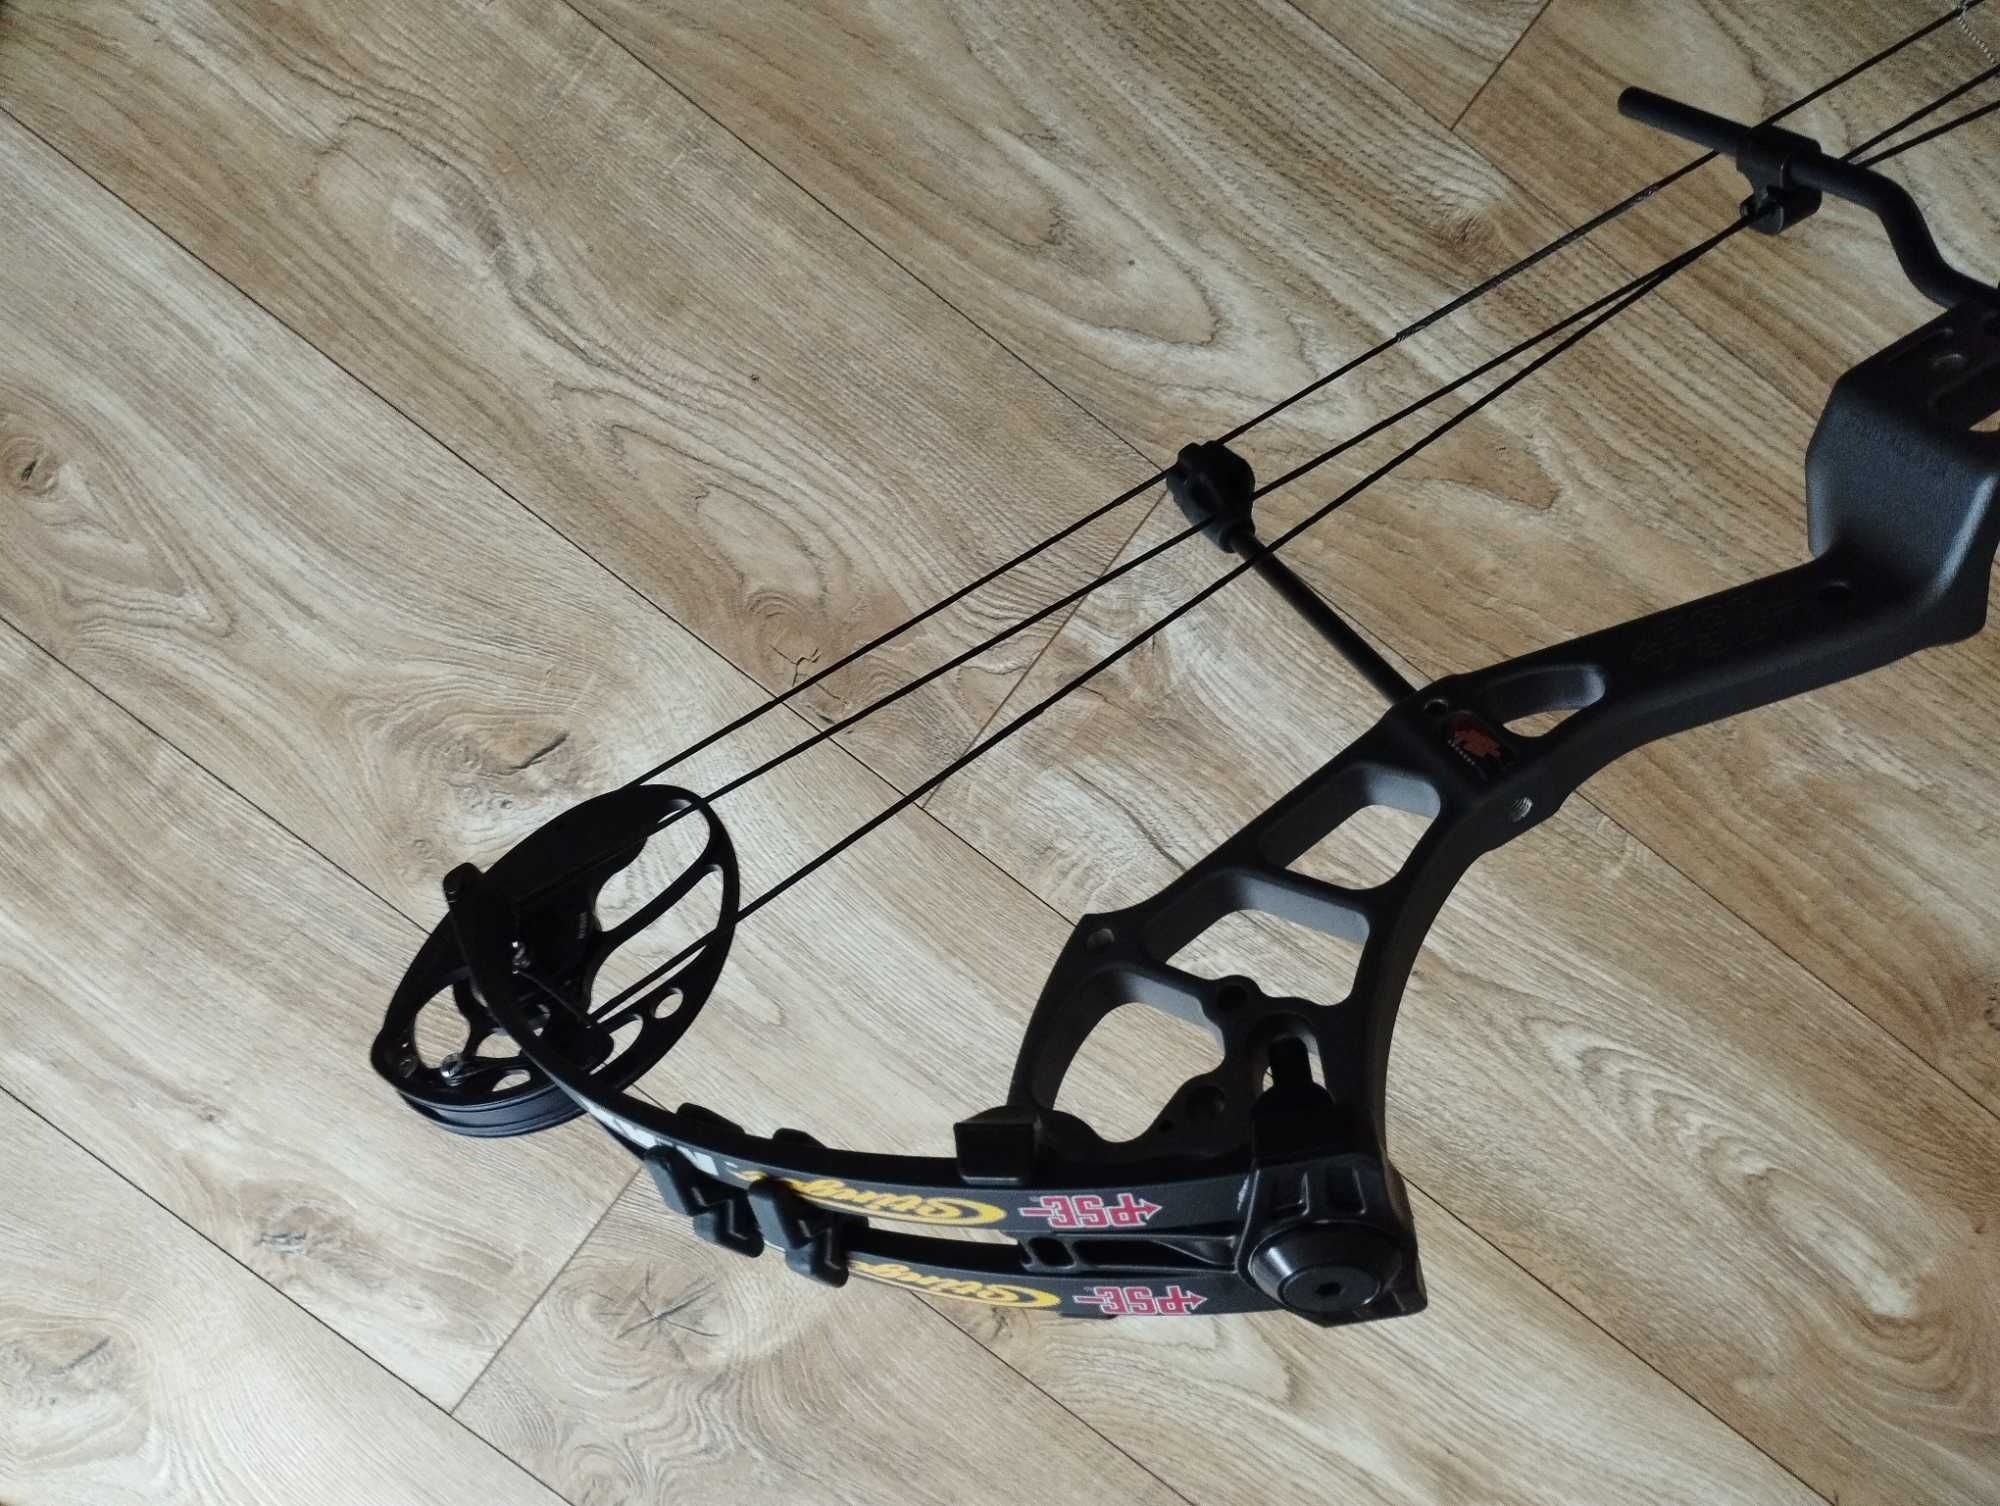 PSE Stinger 70 lbs luk bloczkowy (hunting bow)